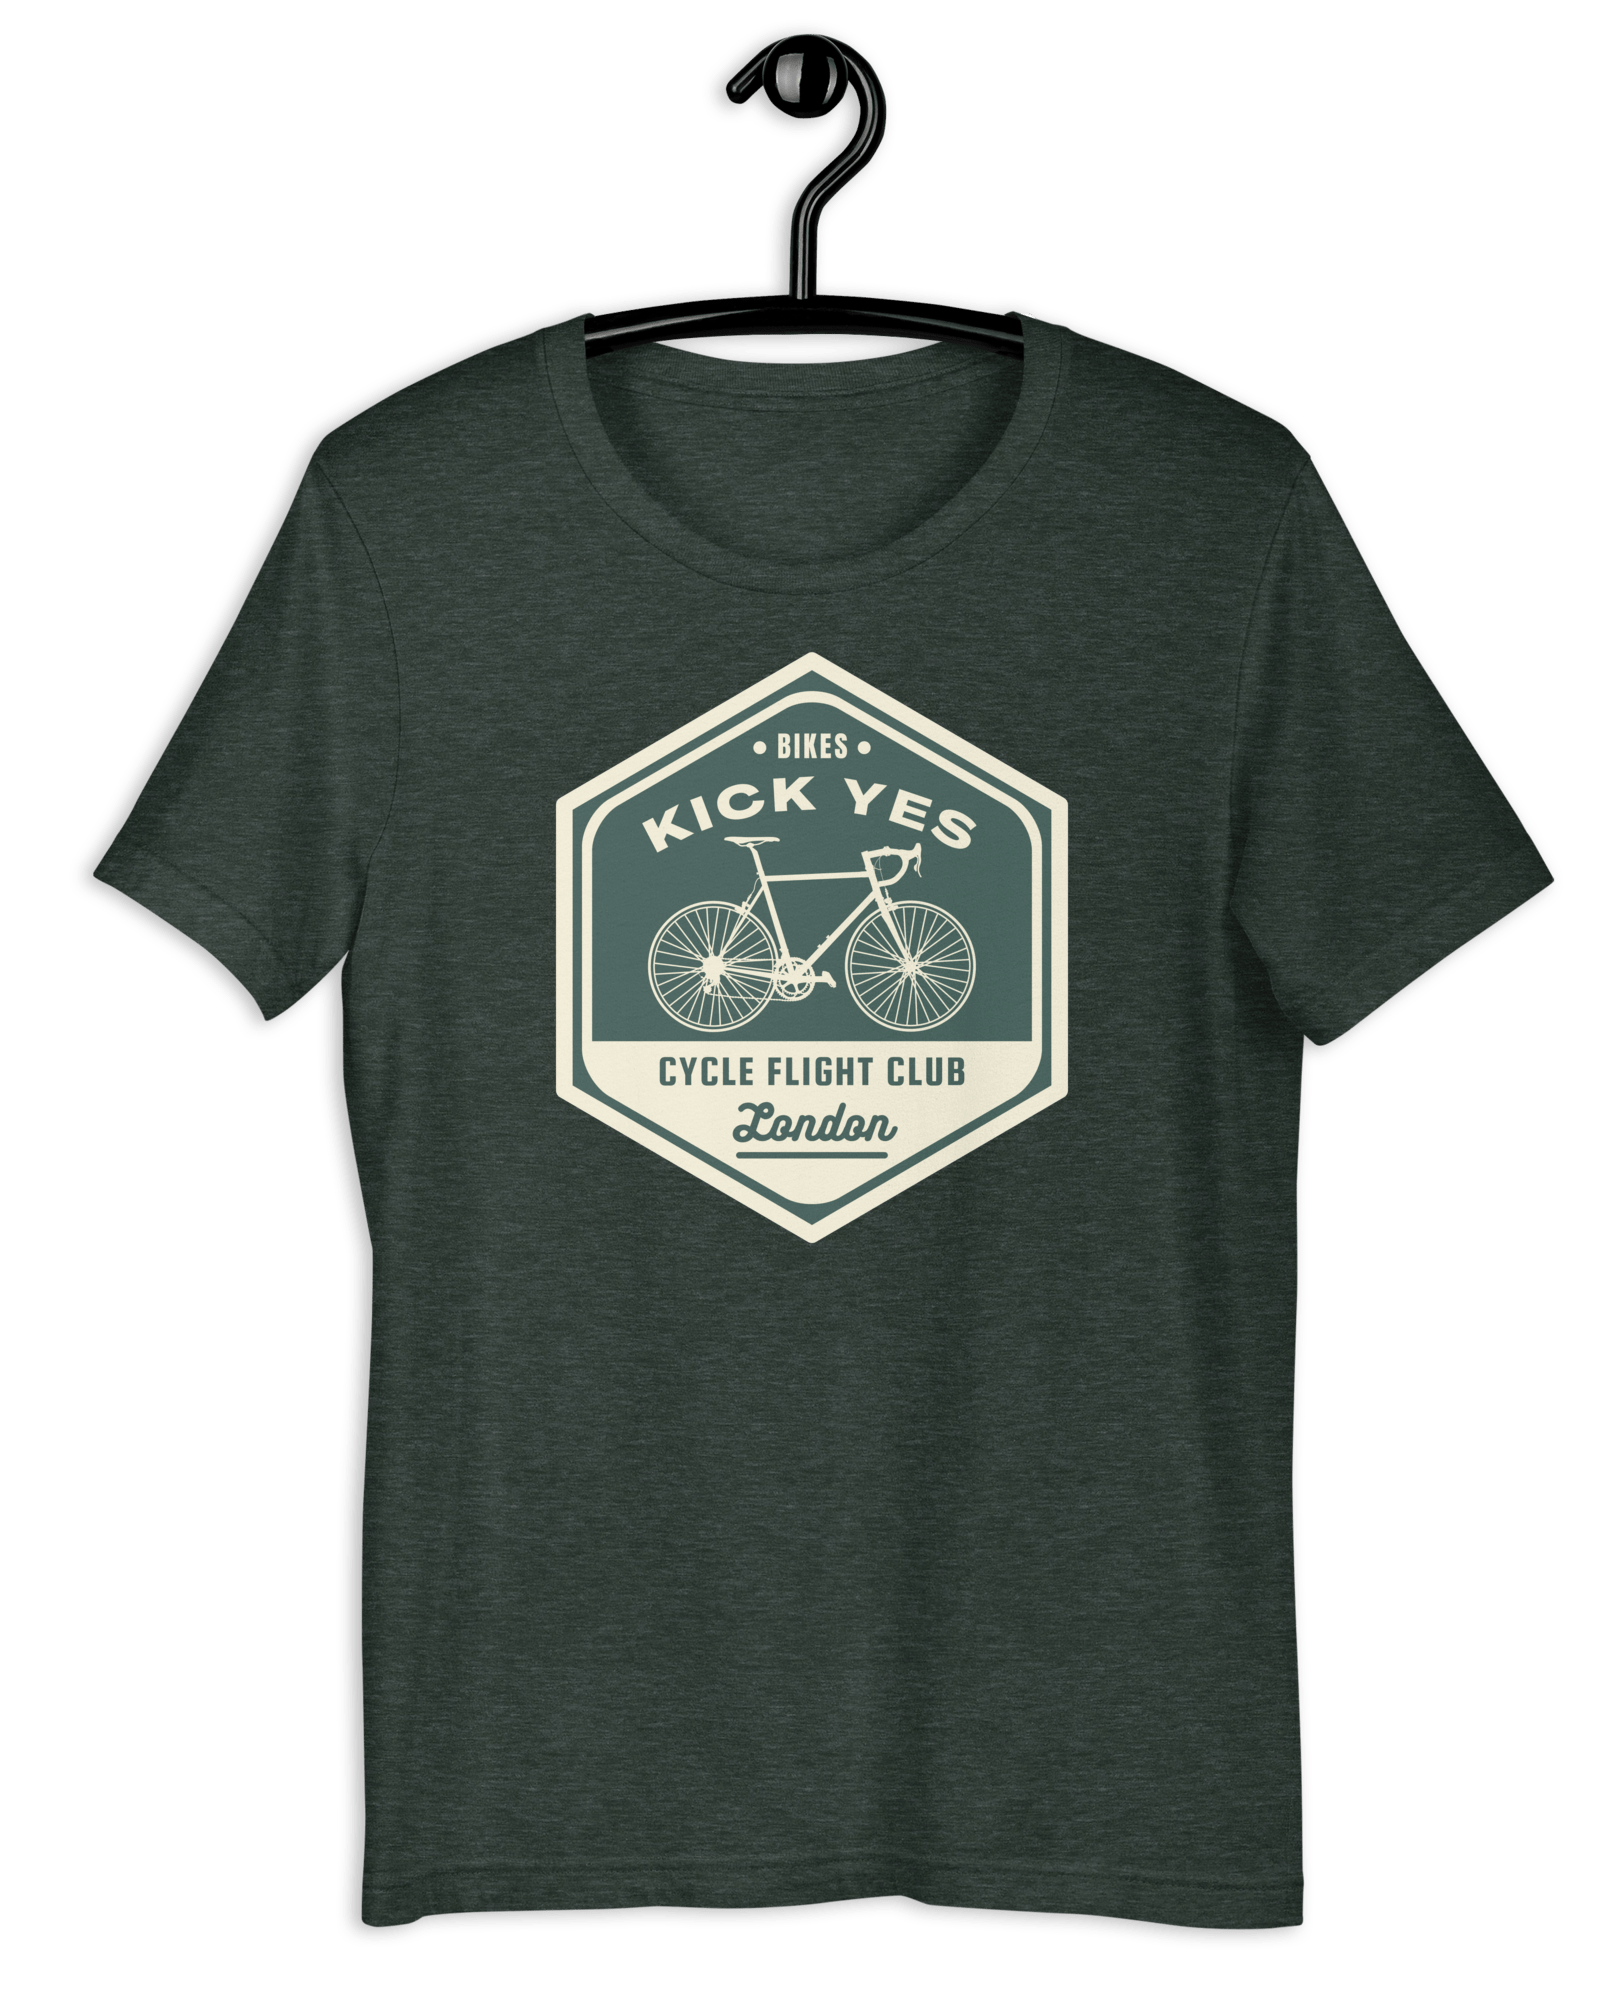 Bikes Kick Yes, Cycle Flight Club London T-shirt Heather Forest / S Shirts & Tops Jolly & Goode